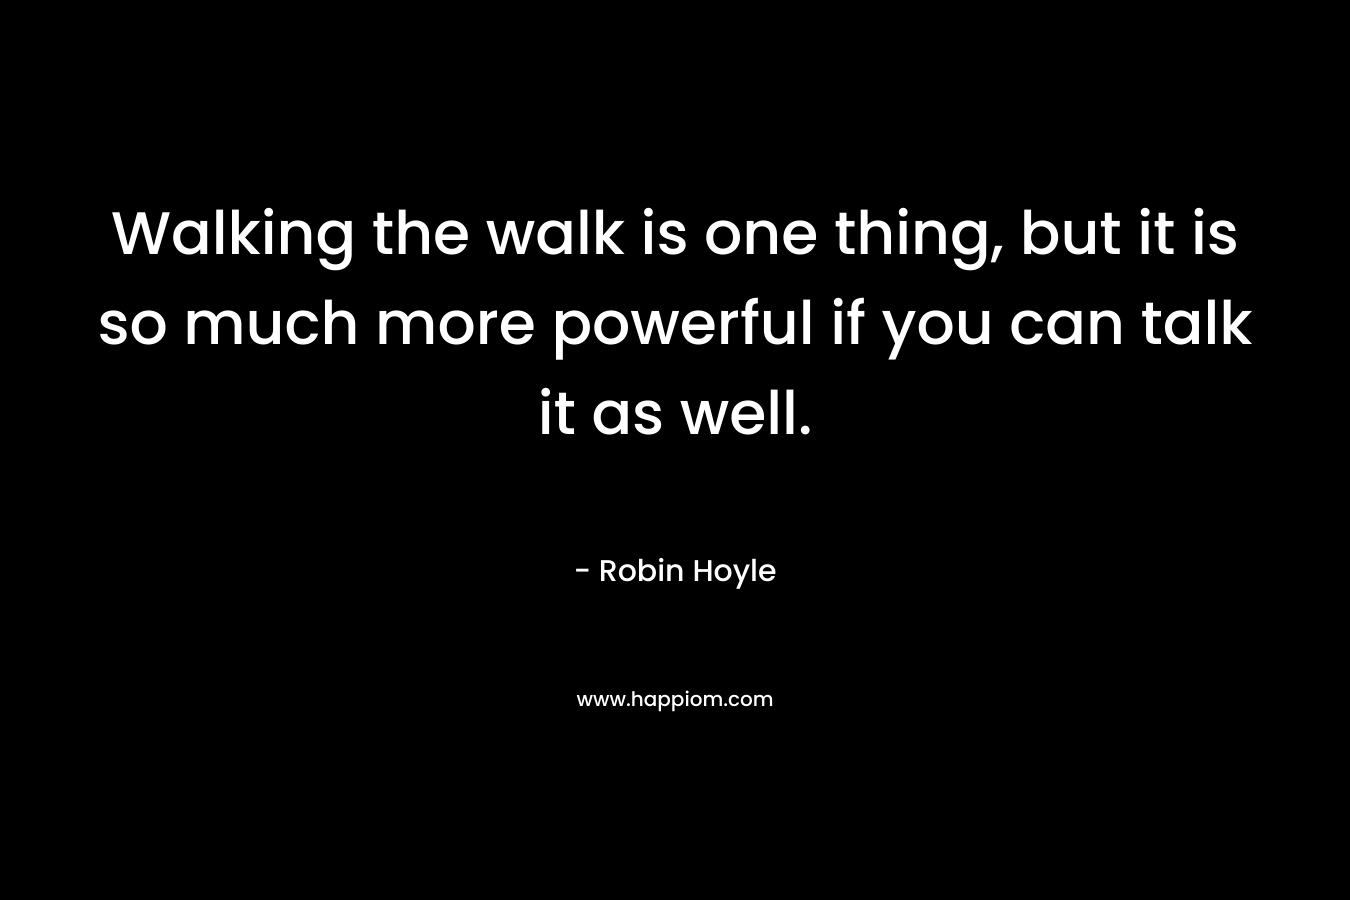 Walking the walk is one thing, but it is so much more powerful if you can talk it as well.